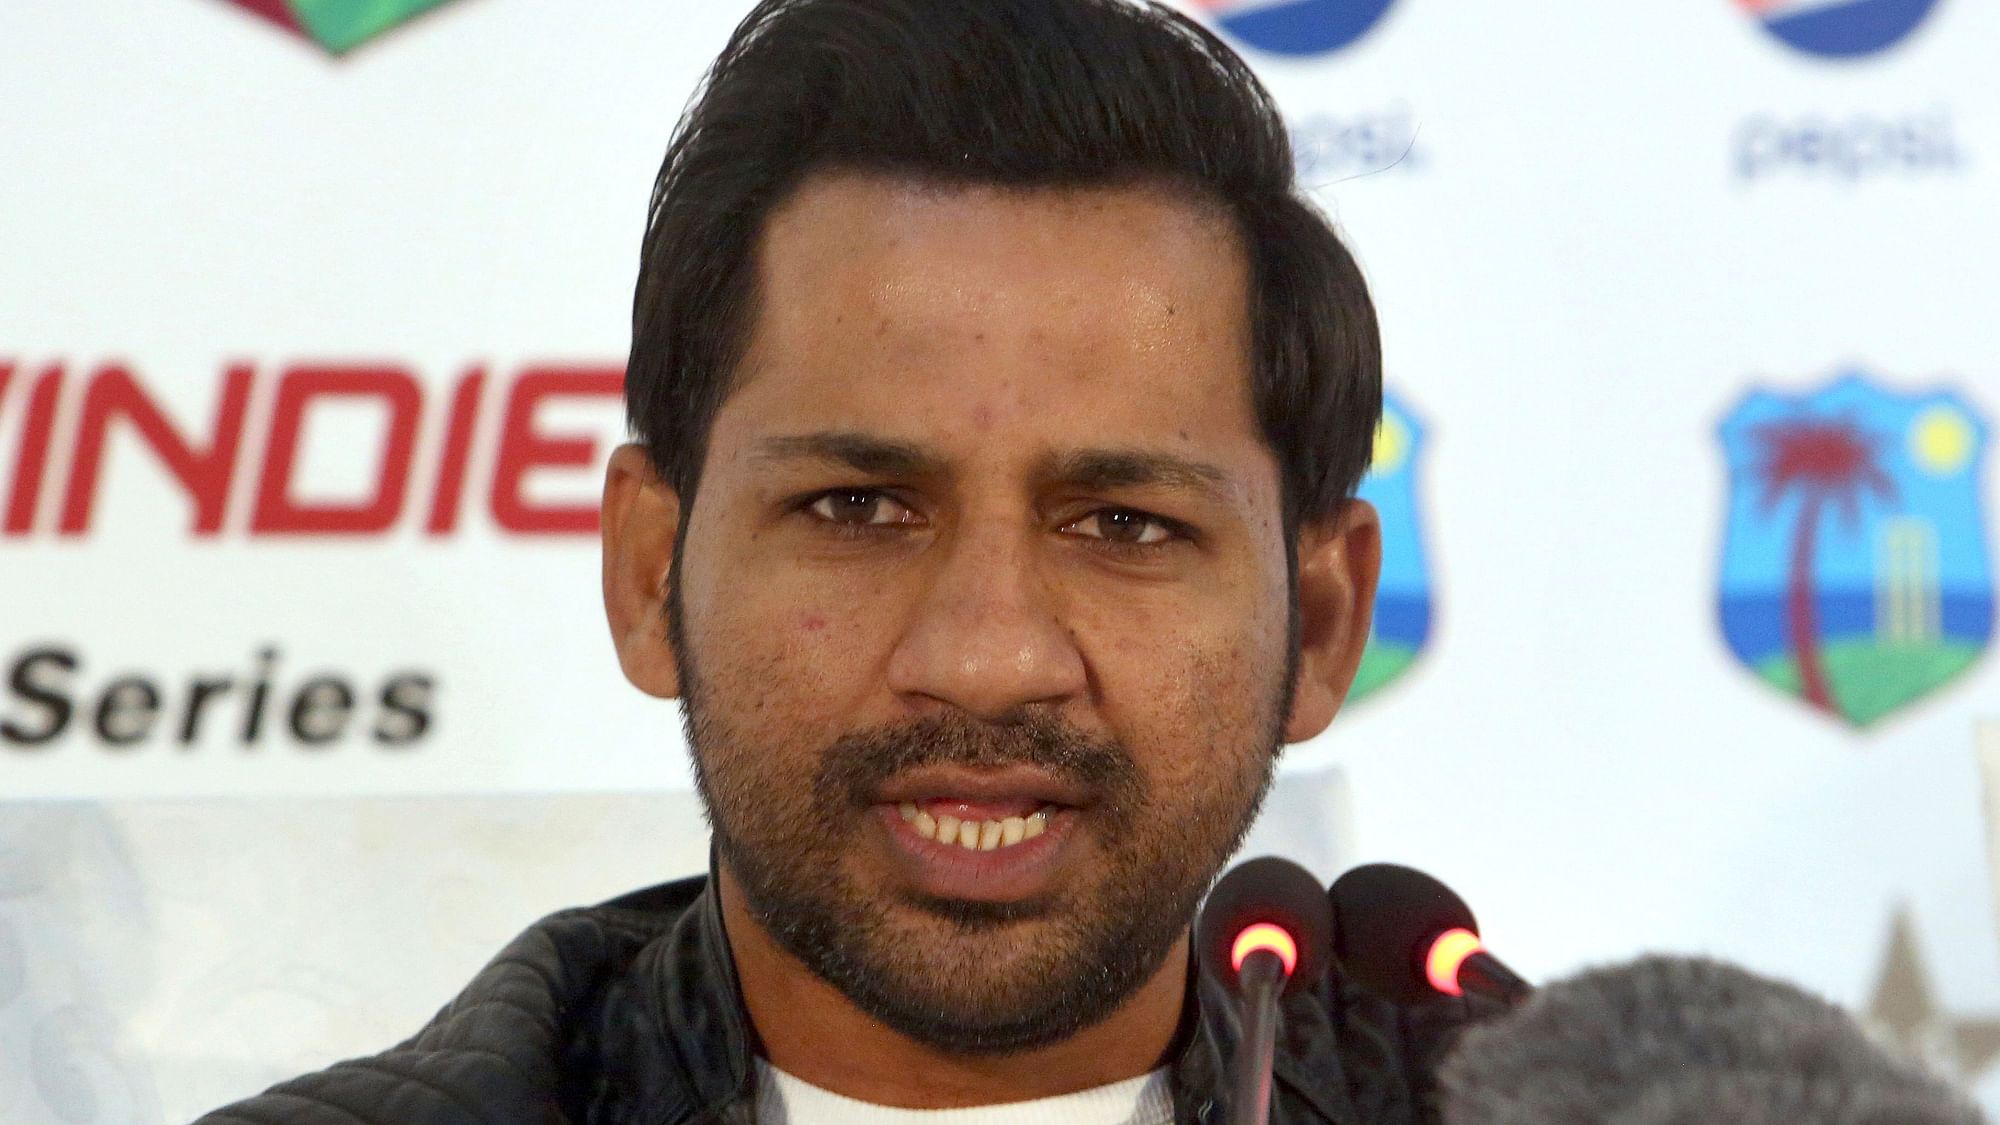 Sarfaraz Ahmed has said Pakistan will try to score 500 runs and get Bangladesh out for 50 on Friday in their 2019 ICC World Cup match.